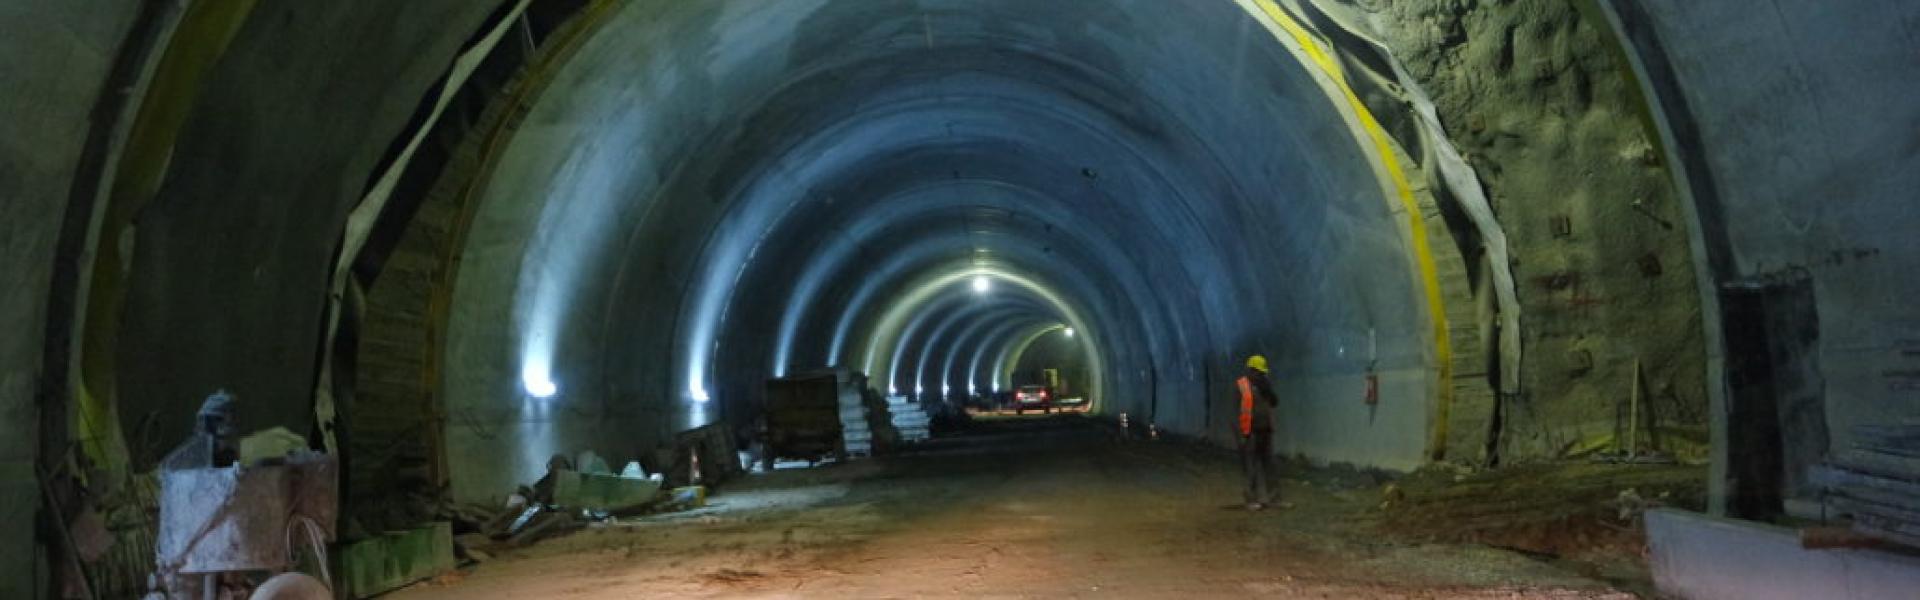 Turks to pay $60 million to subsidise underused Istanbul tunnel - report 79